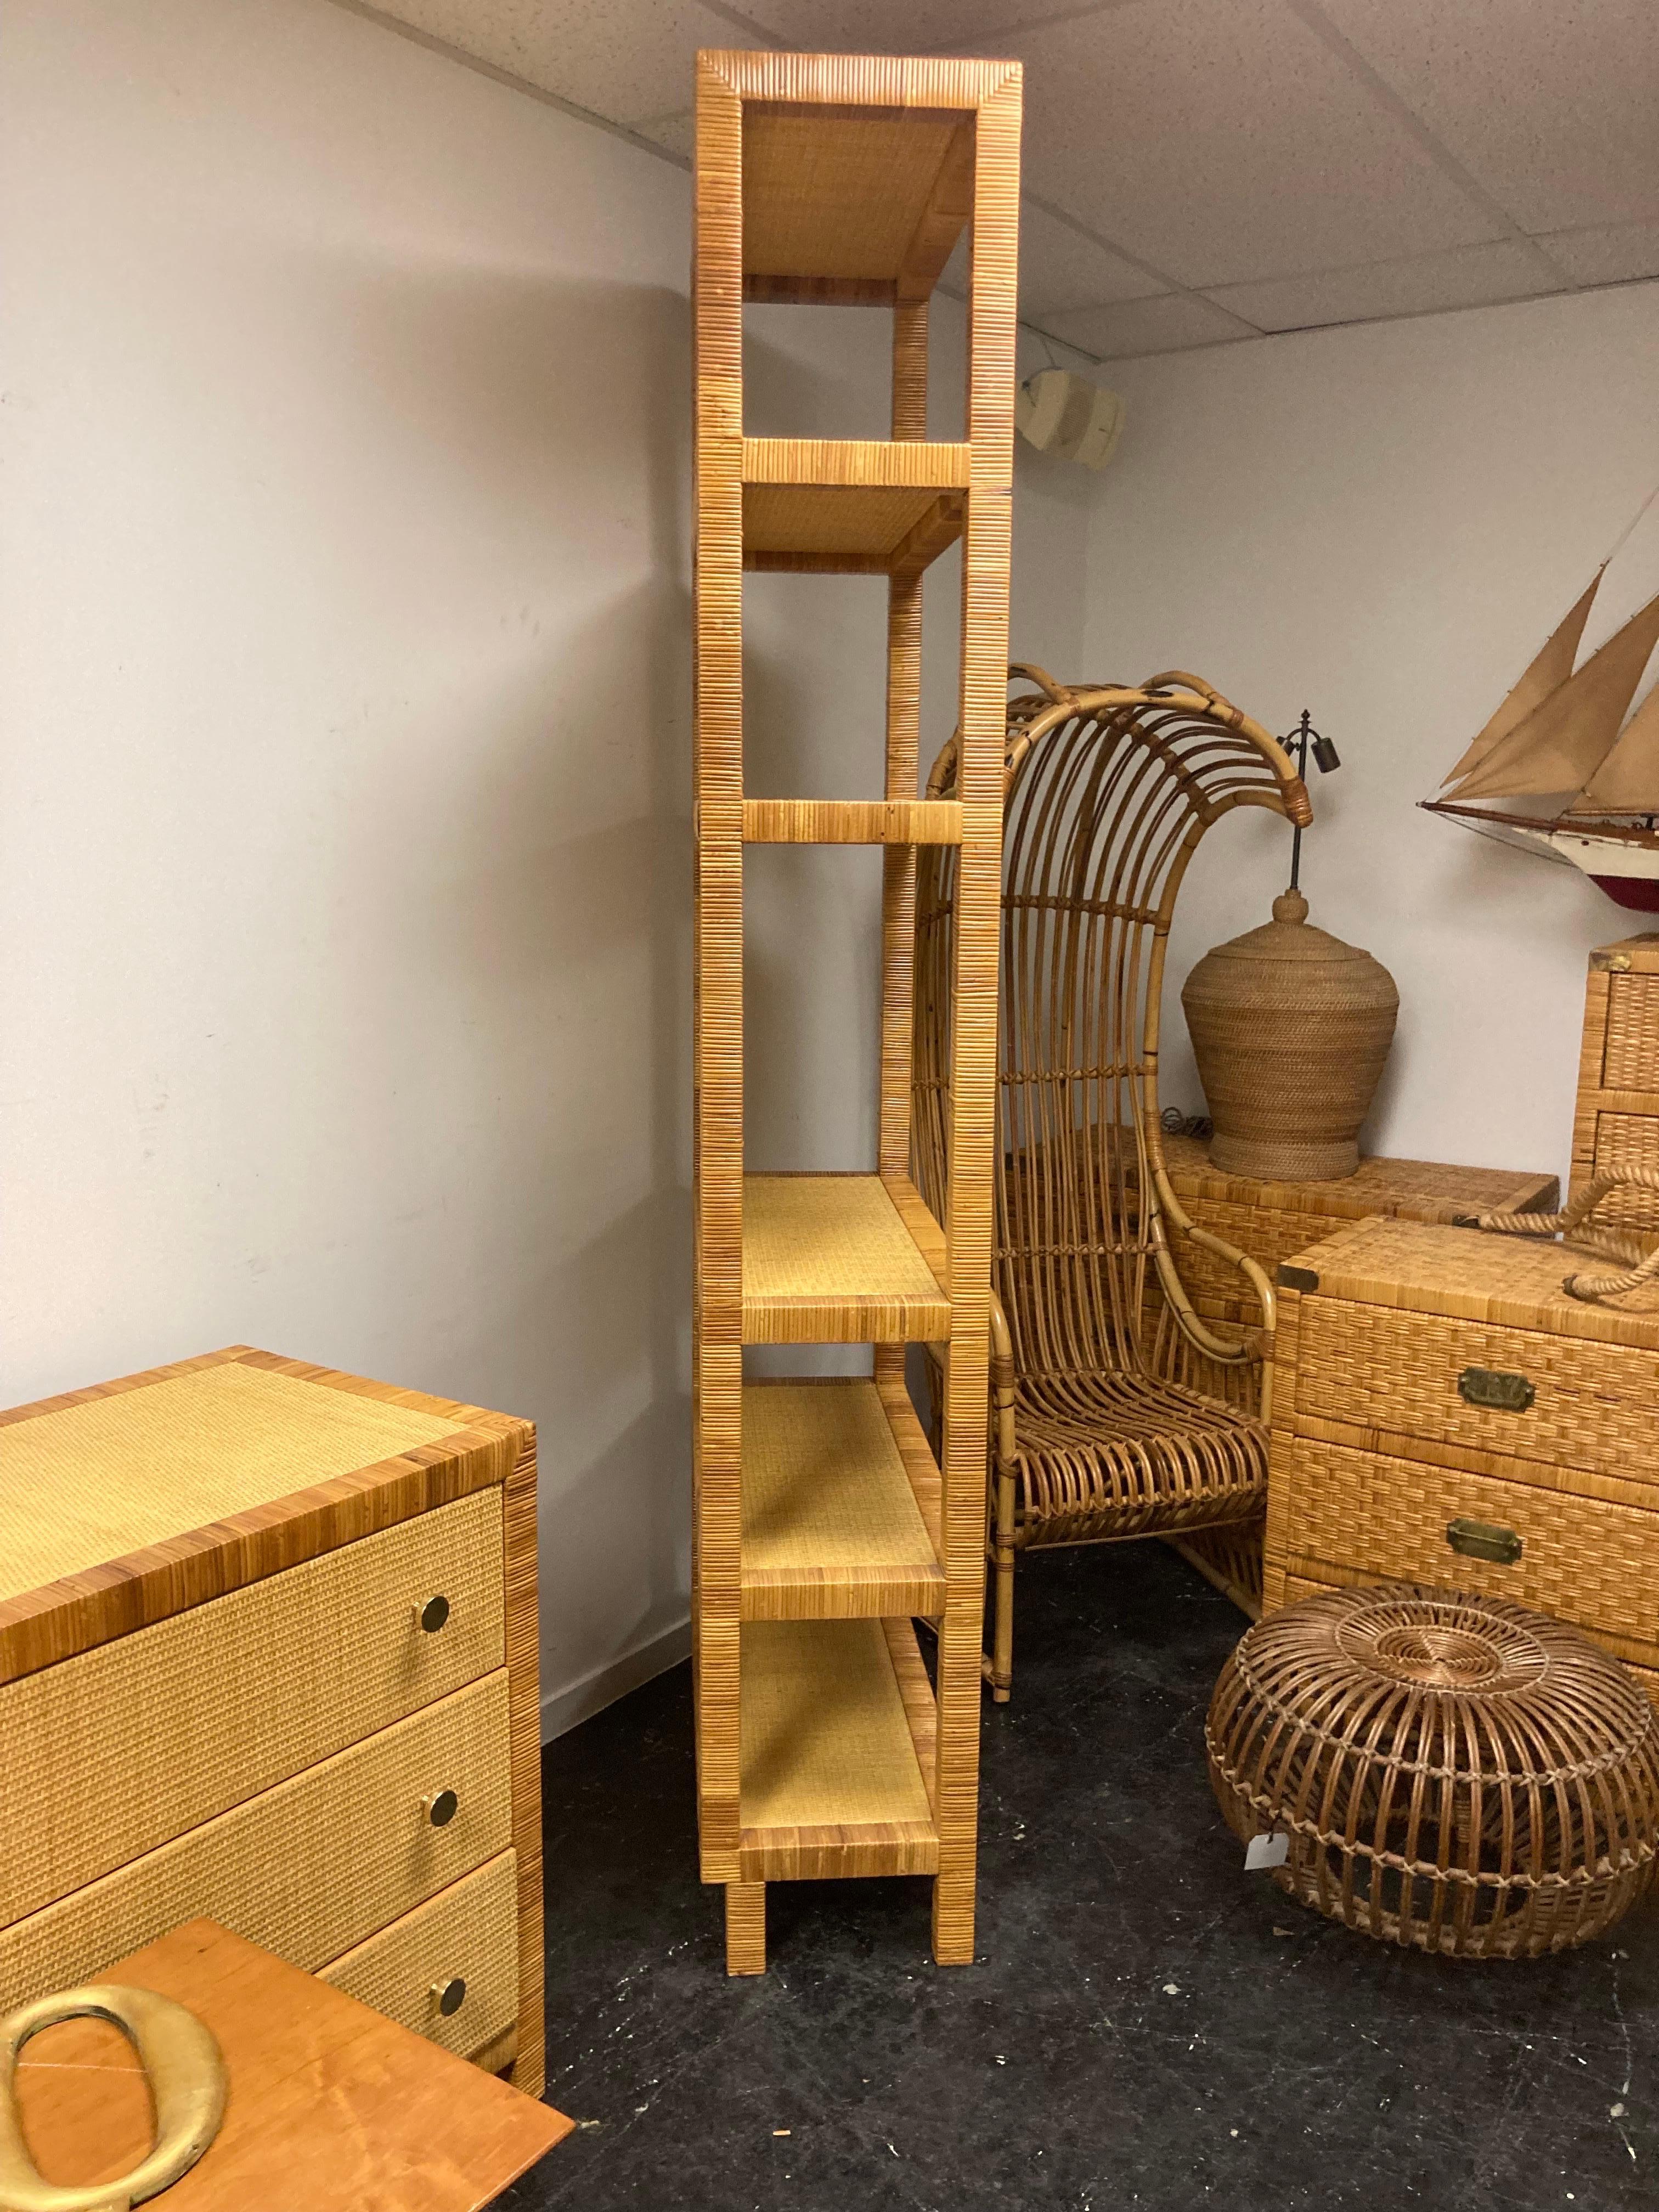 Bielecky Brothers Cane and Rattan Etagere In Good Condition For Sale In East Hampton, NY